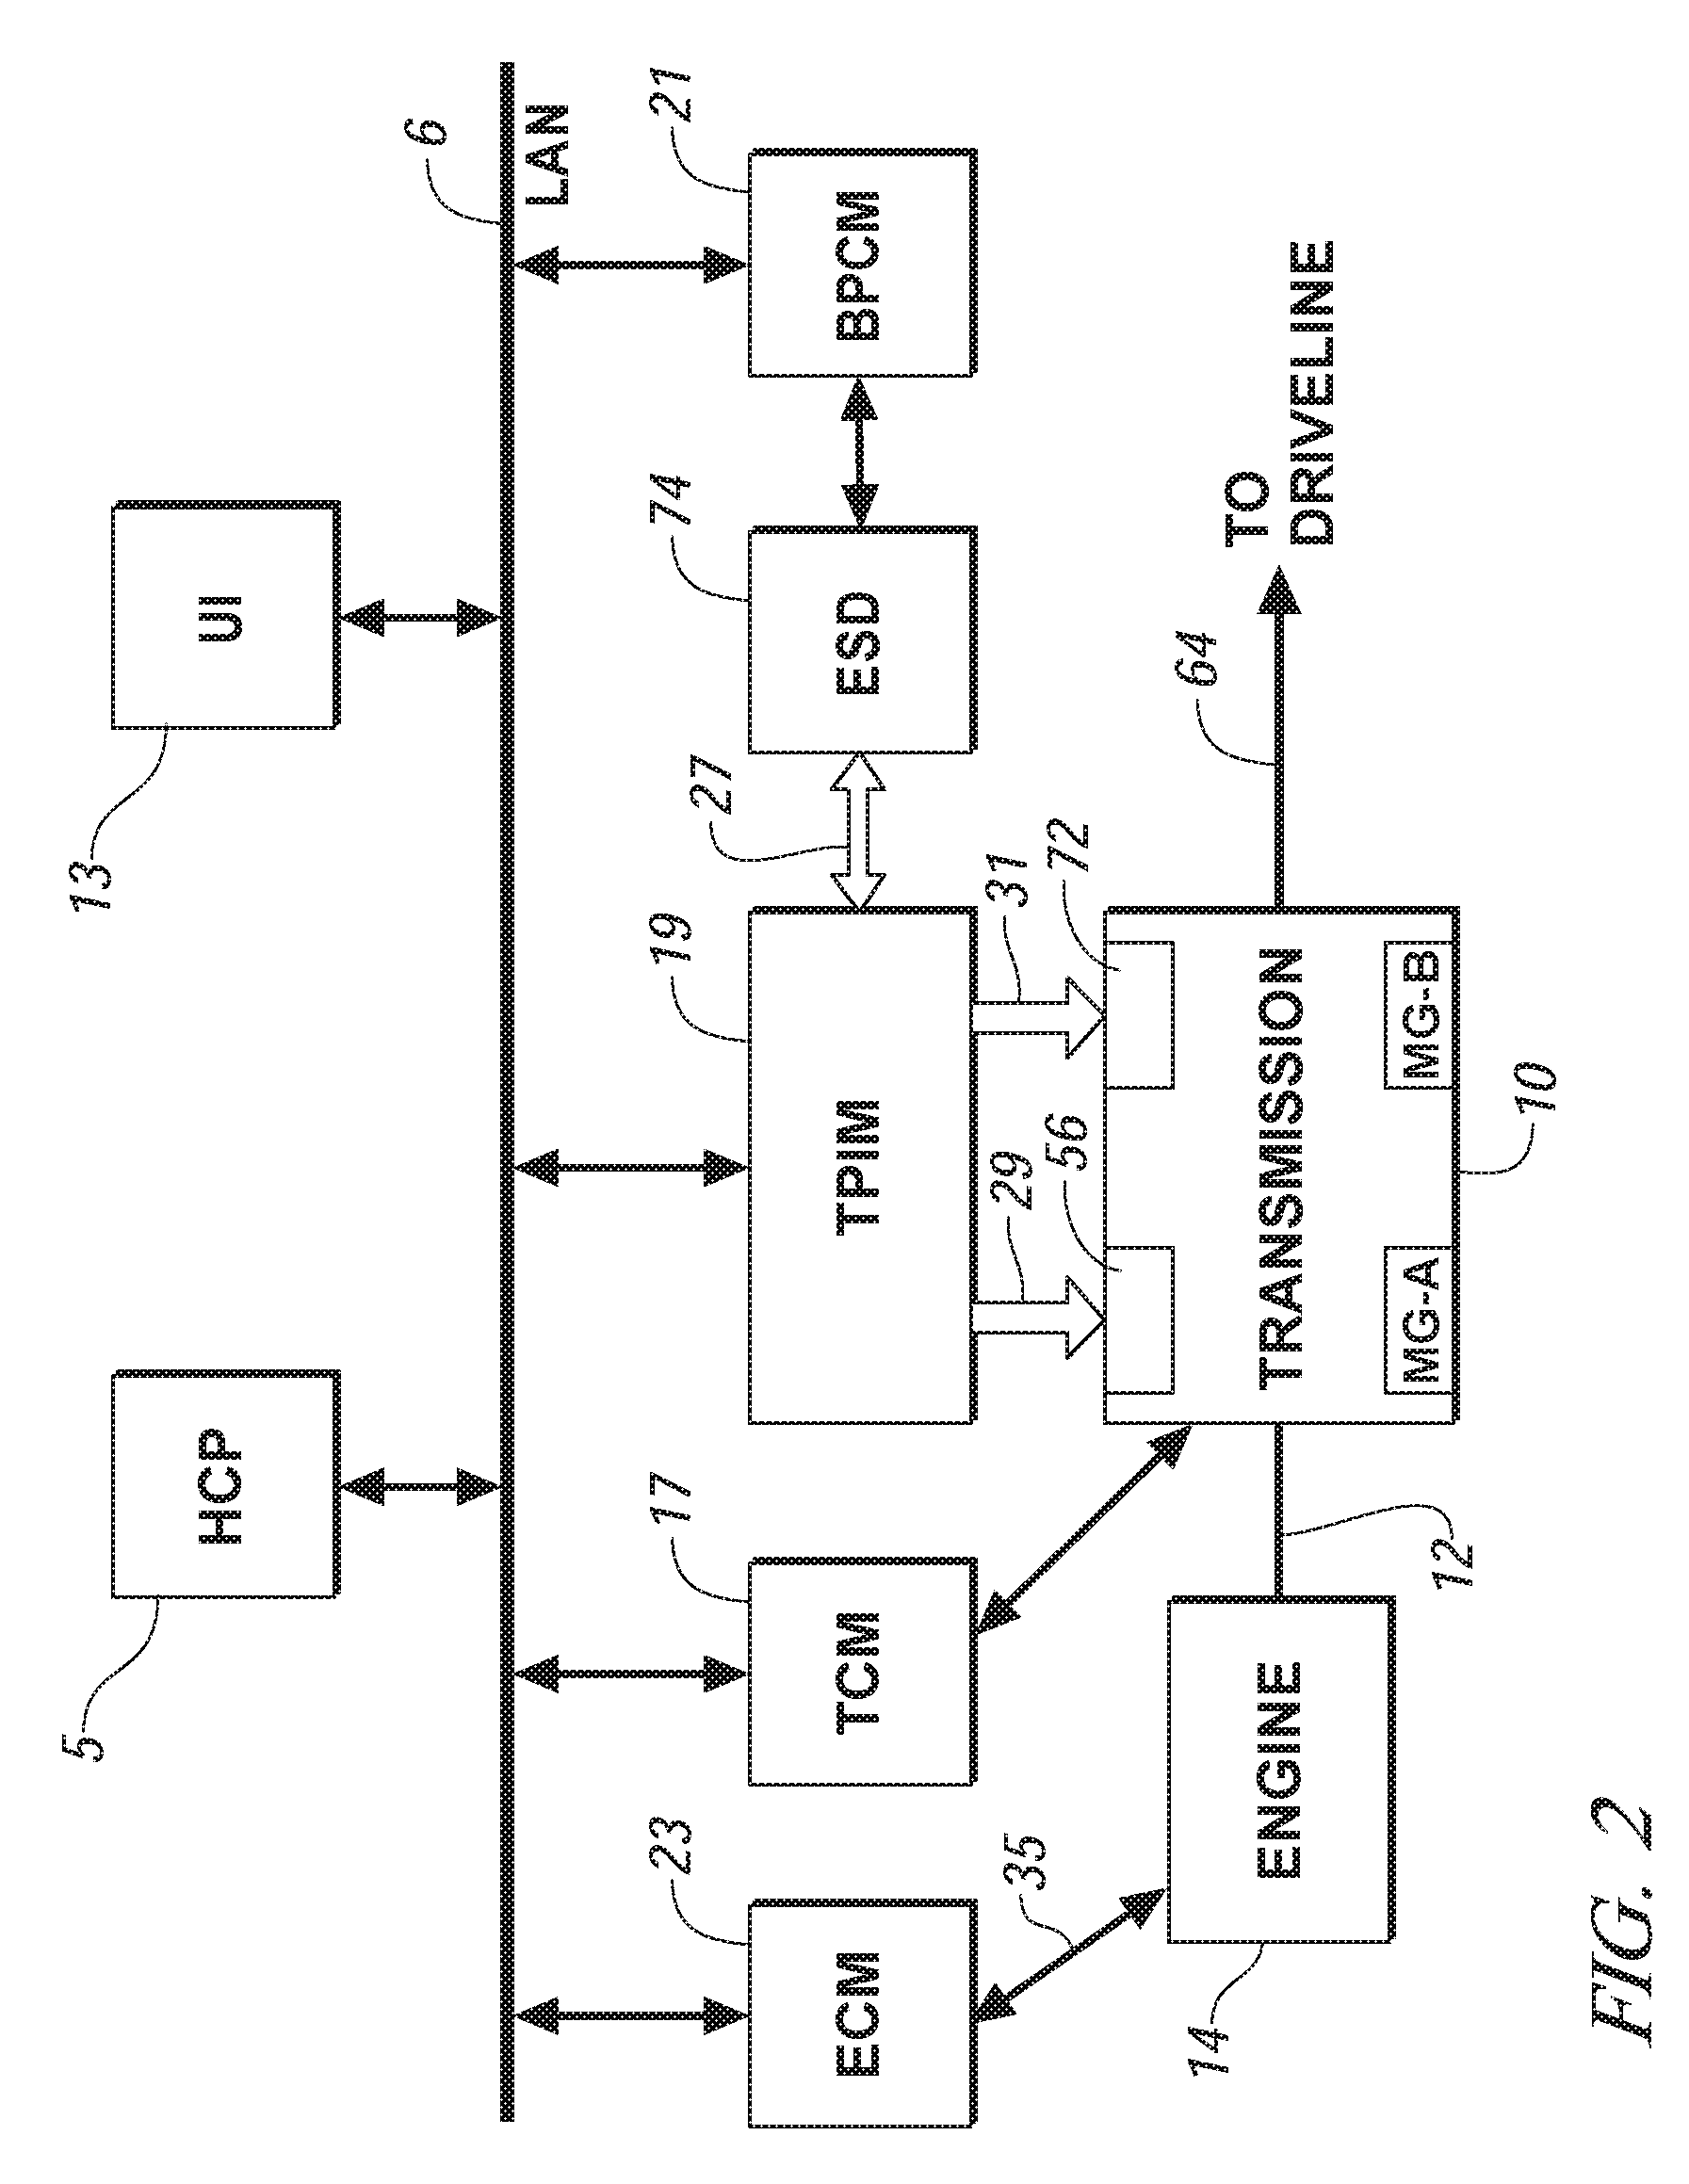 Method and apparatus to monitor devices of a hydraulic circuit of an electro-mechanical transmission